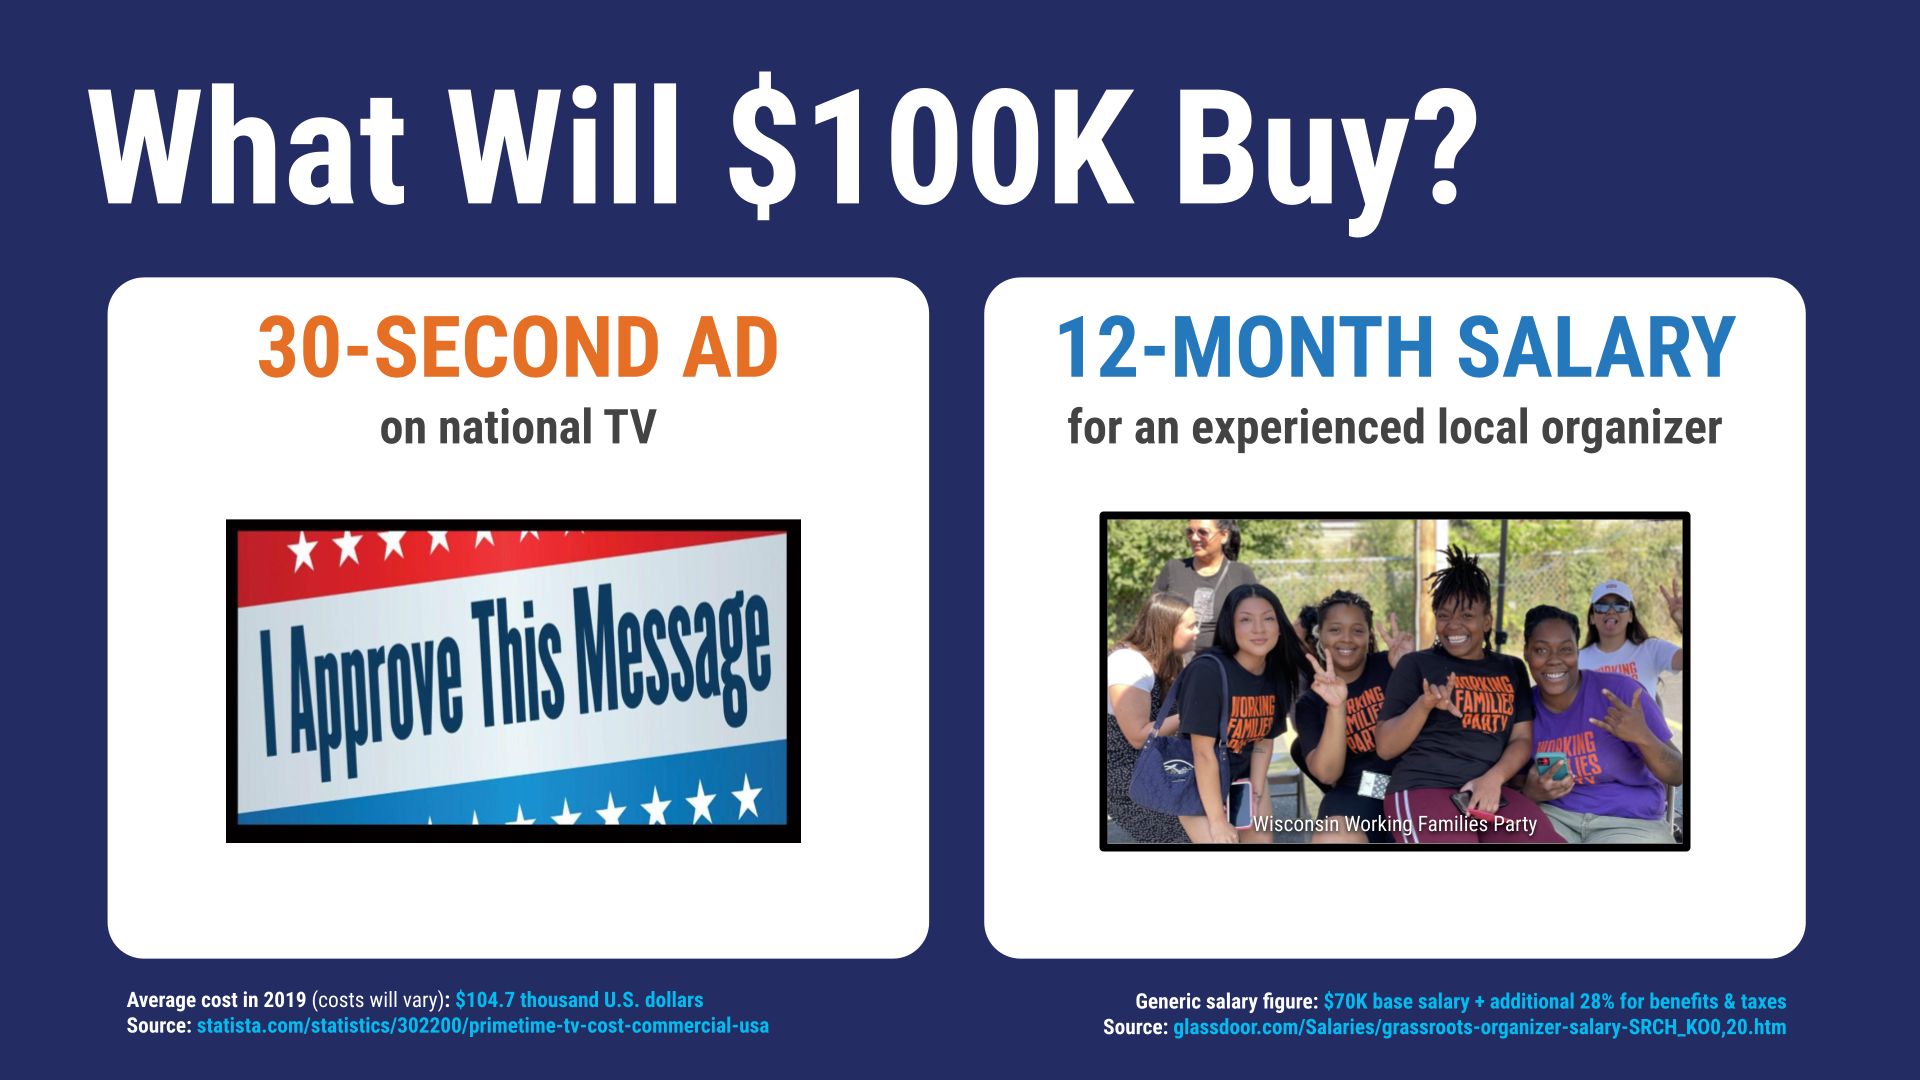 What Will $100K Buy? 30-Second National Ad or 12-Month Organizer Salary.